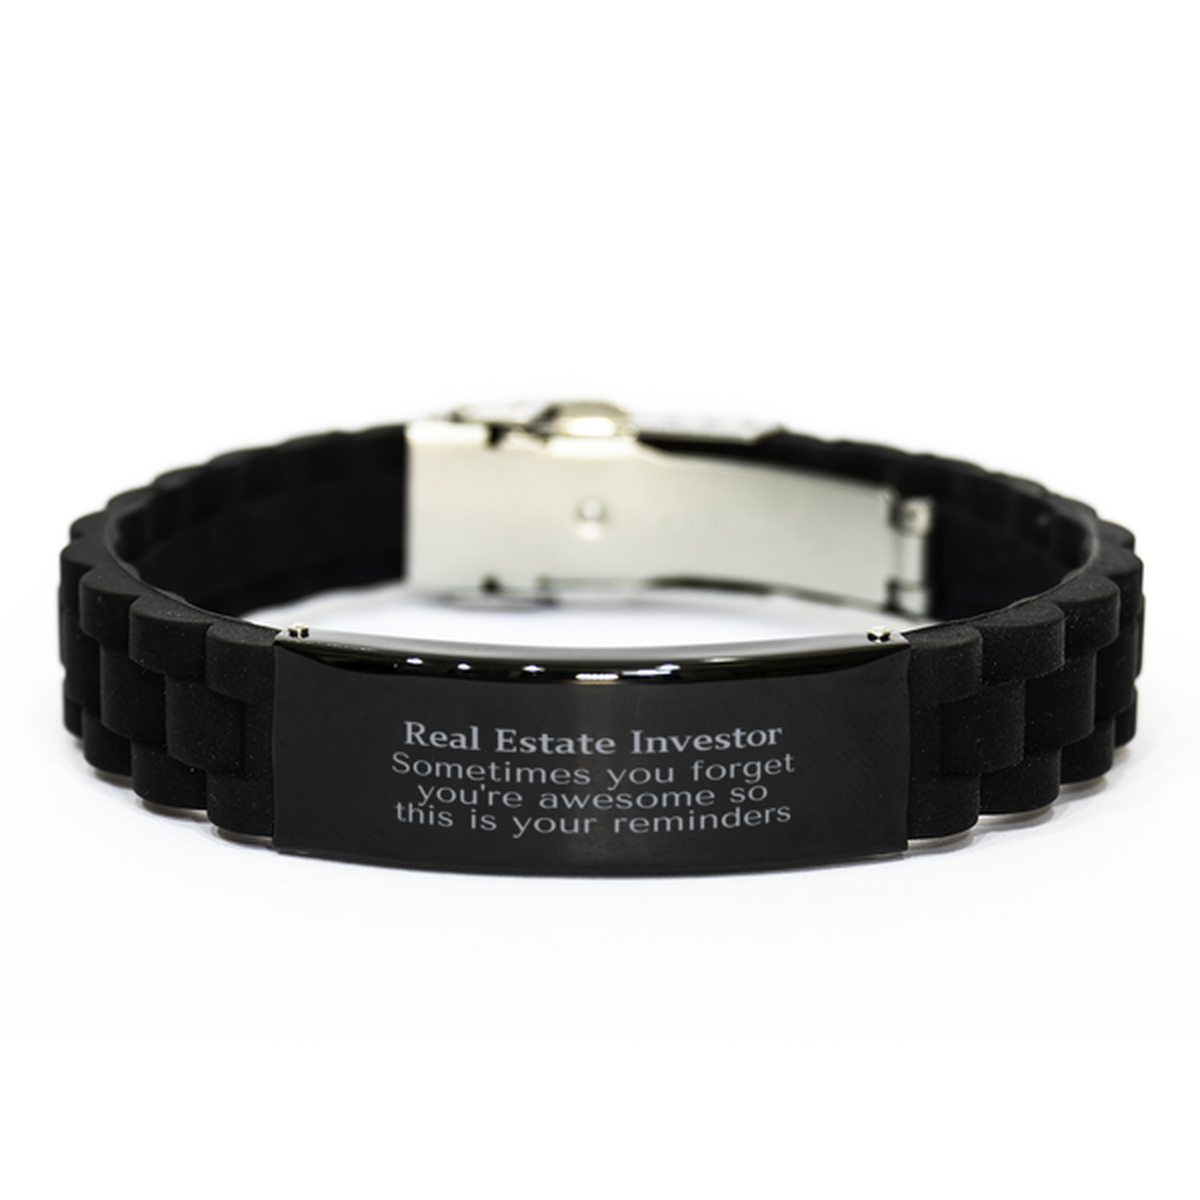 Sentimental Real Estate Investor Black Glidelock Clasp Bracelet, Real Estate Investor Sometimes you forget you're awesome so this is your reminders, Graduation Christmas Birthday Gifts for Real Estate Investor, Men, Women, Coworkers